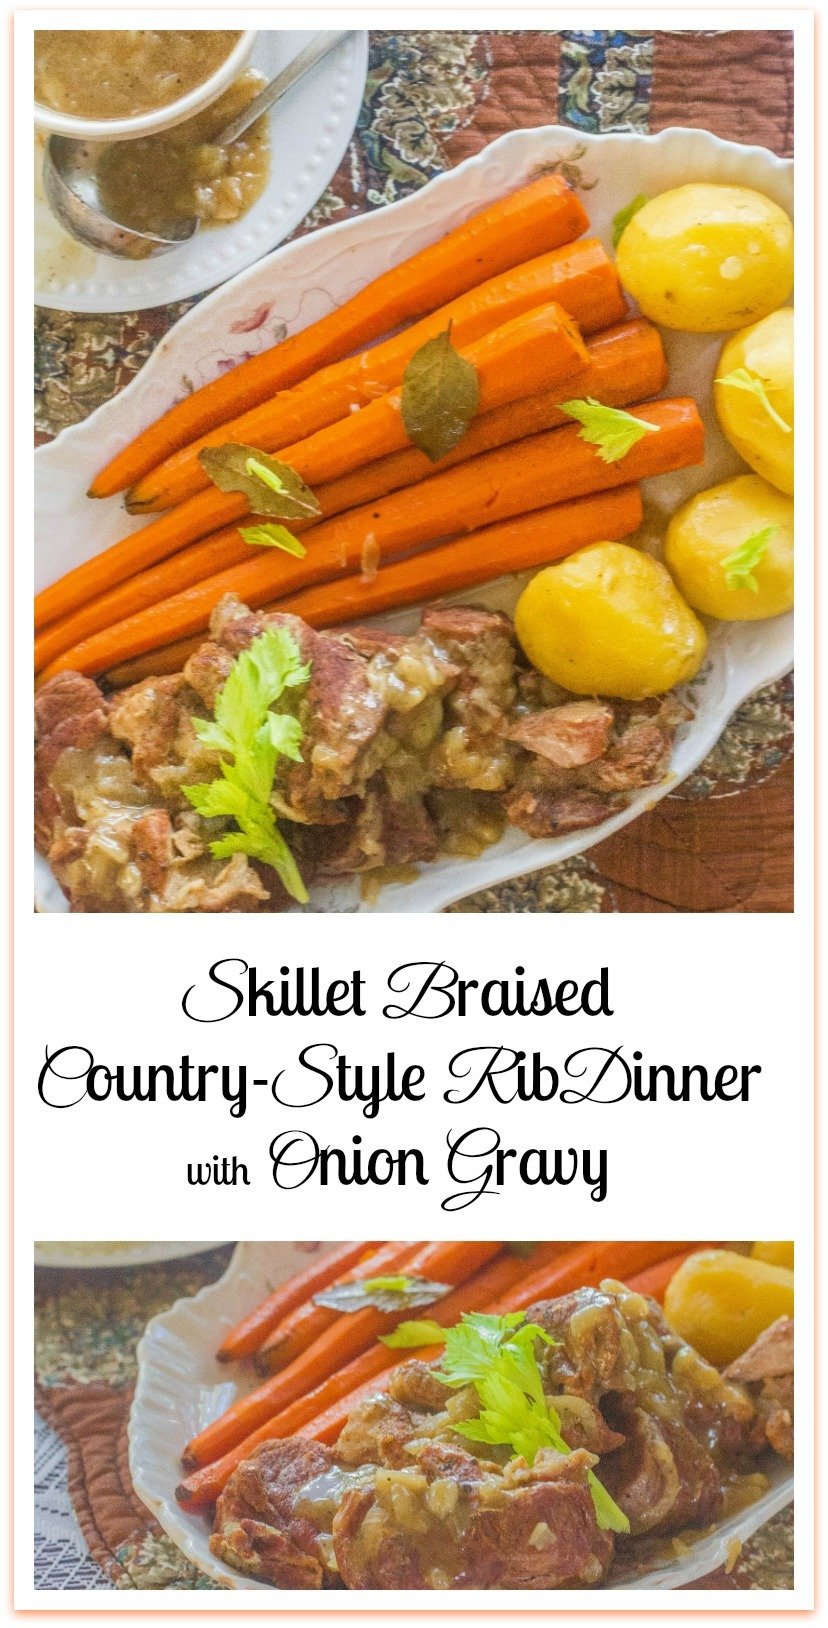 let's talk about  the Skillet Braised Country-Style Rib Dinner with Onion Gravy that I  fixed in my Lodge cast iron skillet.  It's a one pot skillet meal that's  so good it will make you want to swallow your tongue. The pork is tender like butter and the gravy has a flavor you'll crave for the rest of your natural life. #SkilletBraised #CountryStyleRibDinner